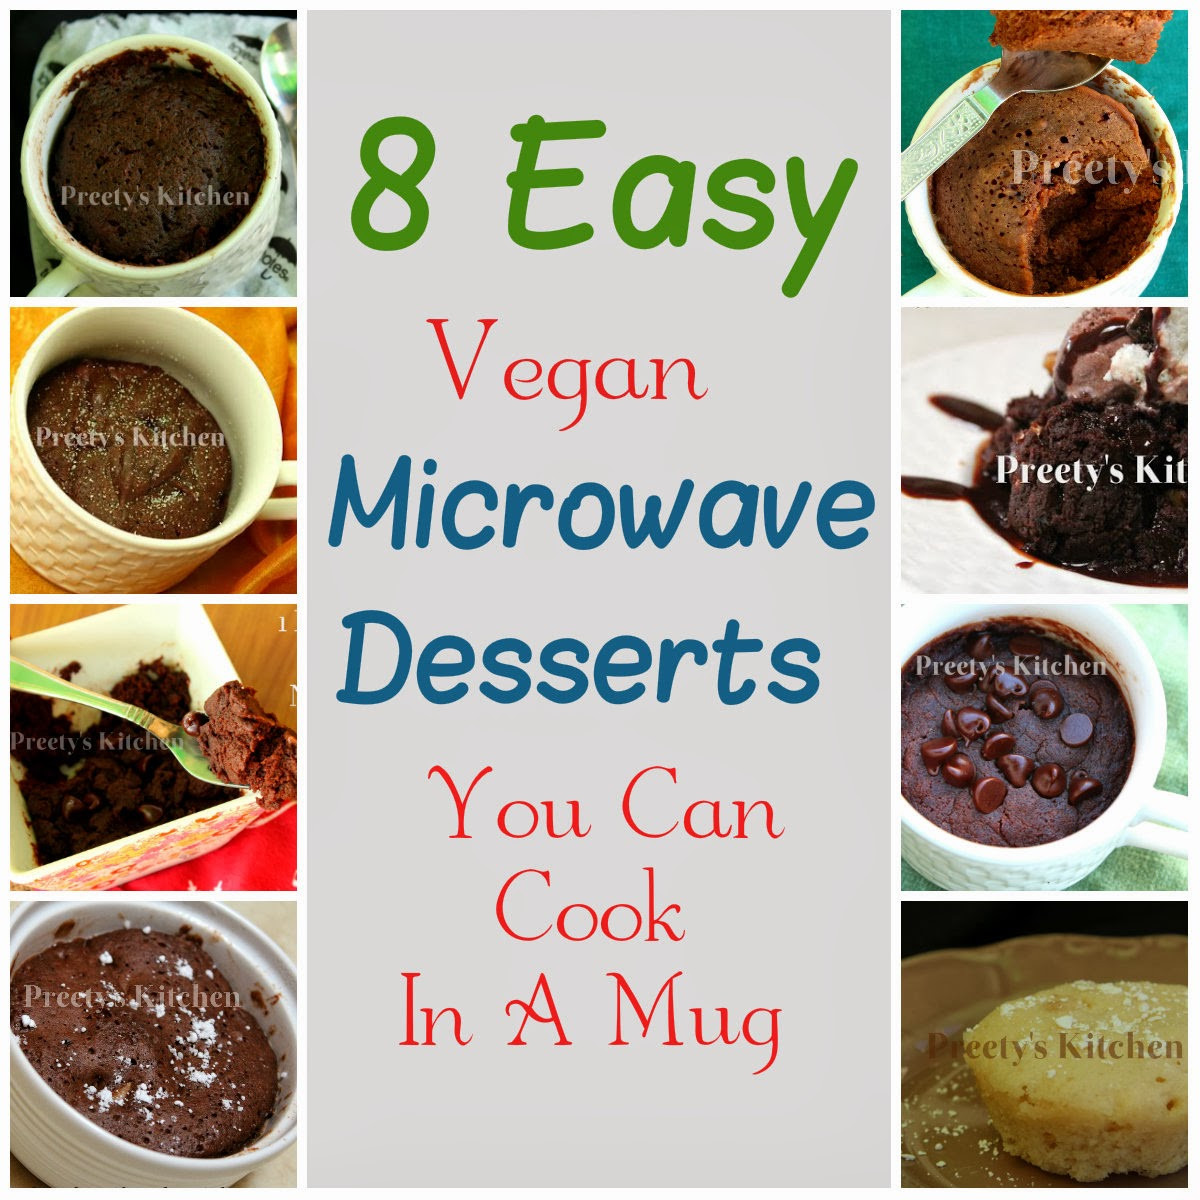 Microwave Dessert Recipes
 Preety s Kitchen 8 Easy Vegan Microwave Desserts You Can